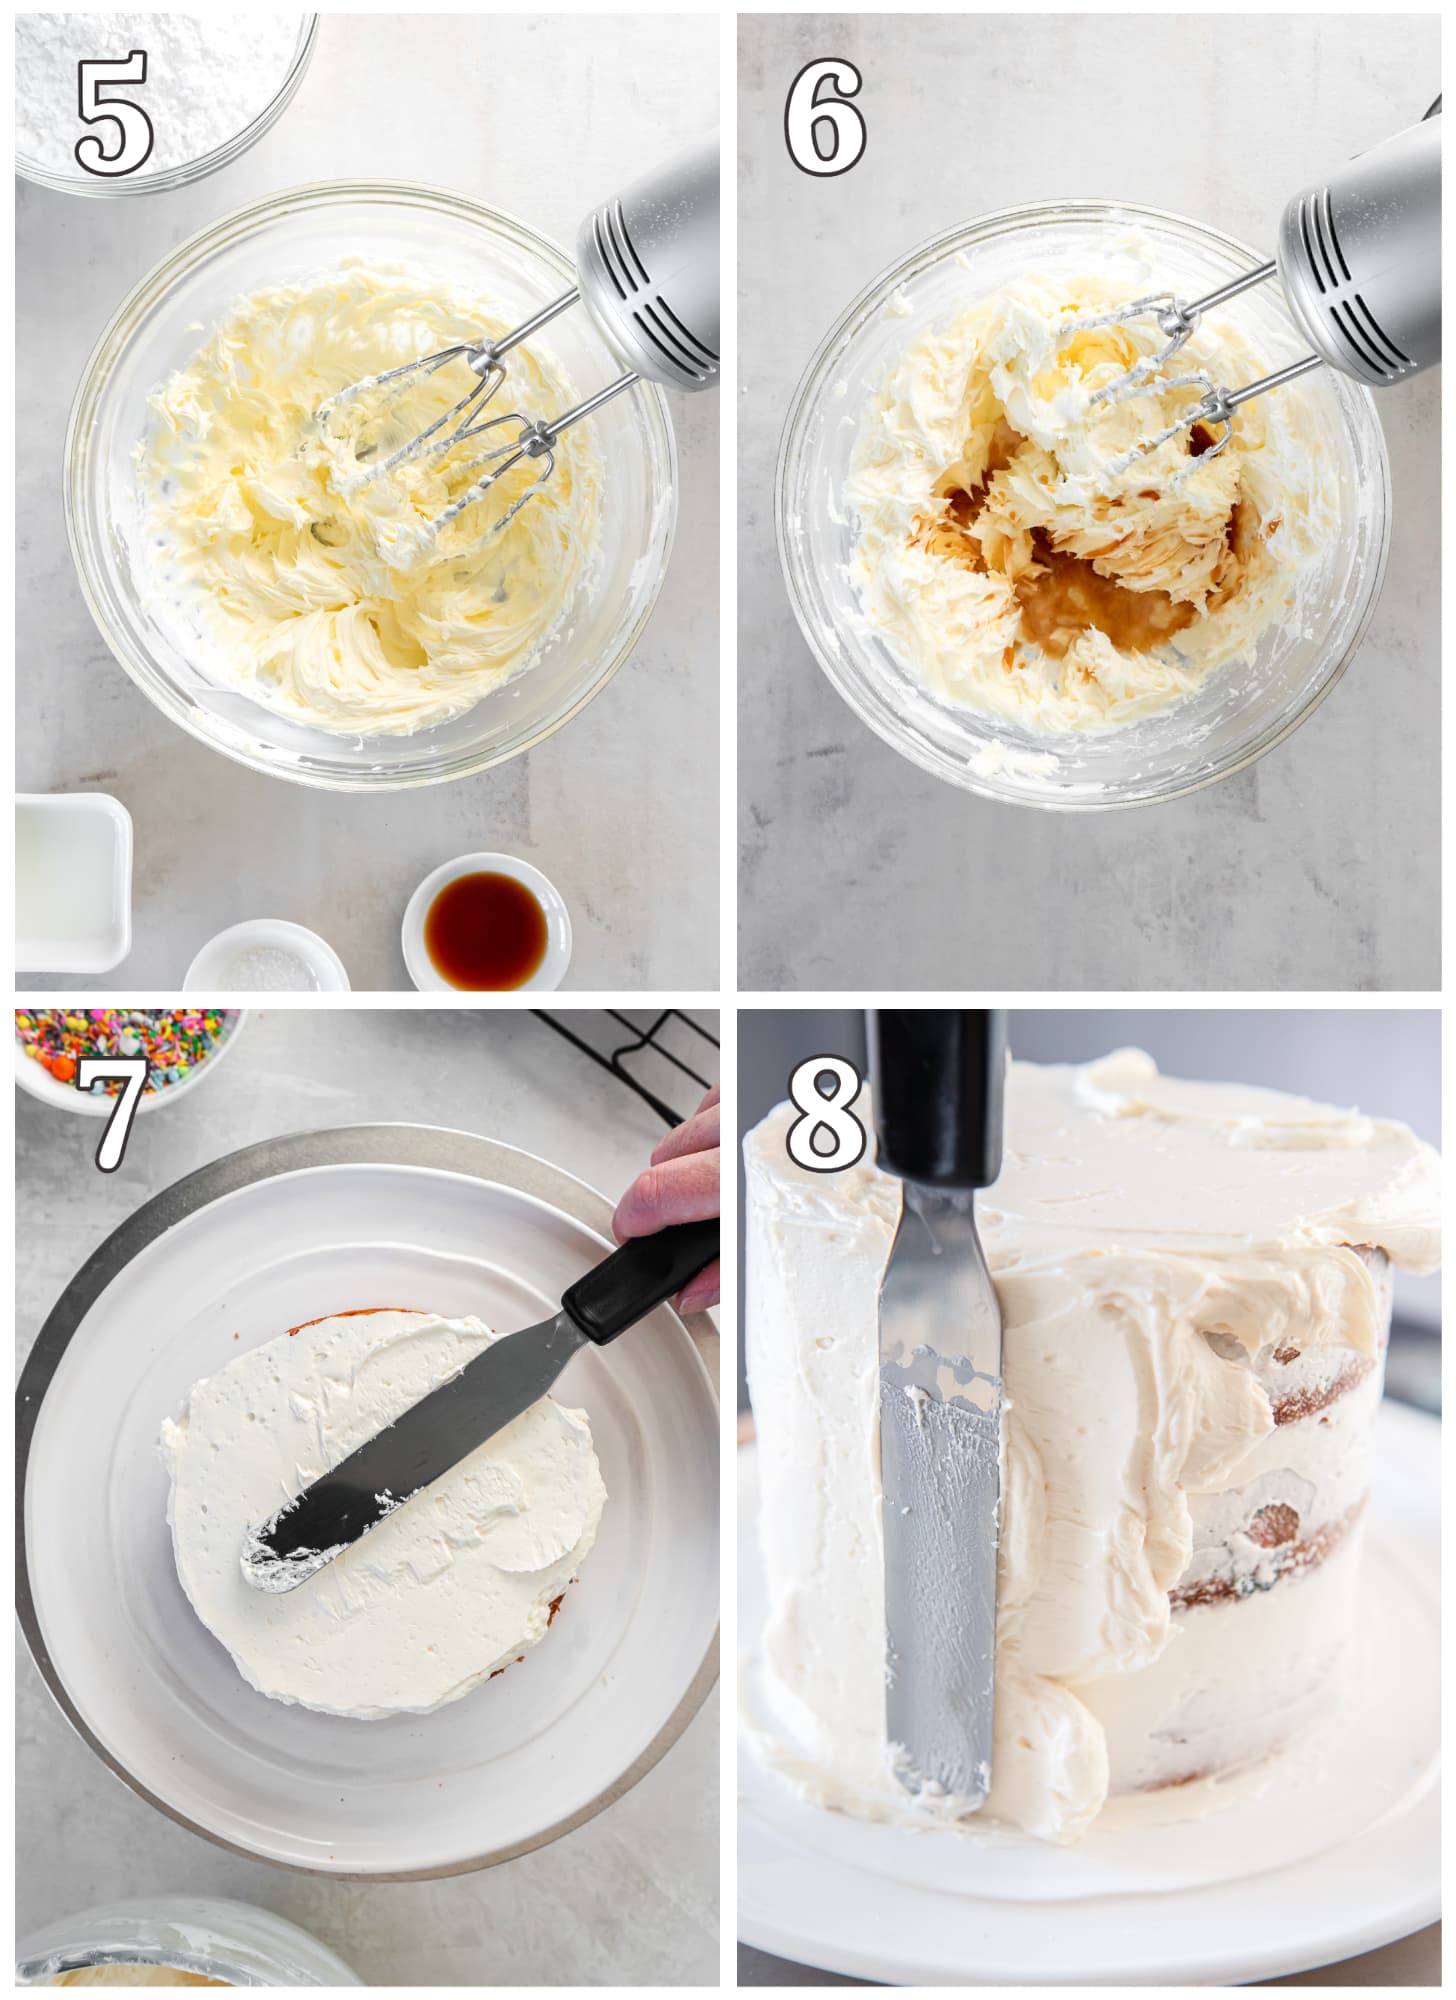 photo collage demonstrating how to make buttercream frosting and frost a funfetti cake.